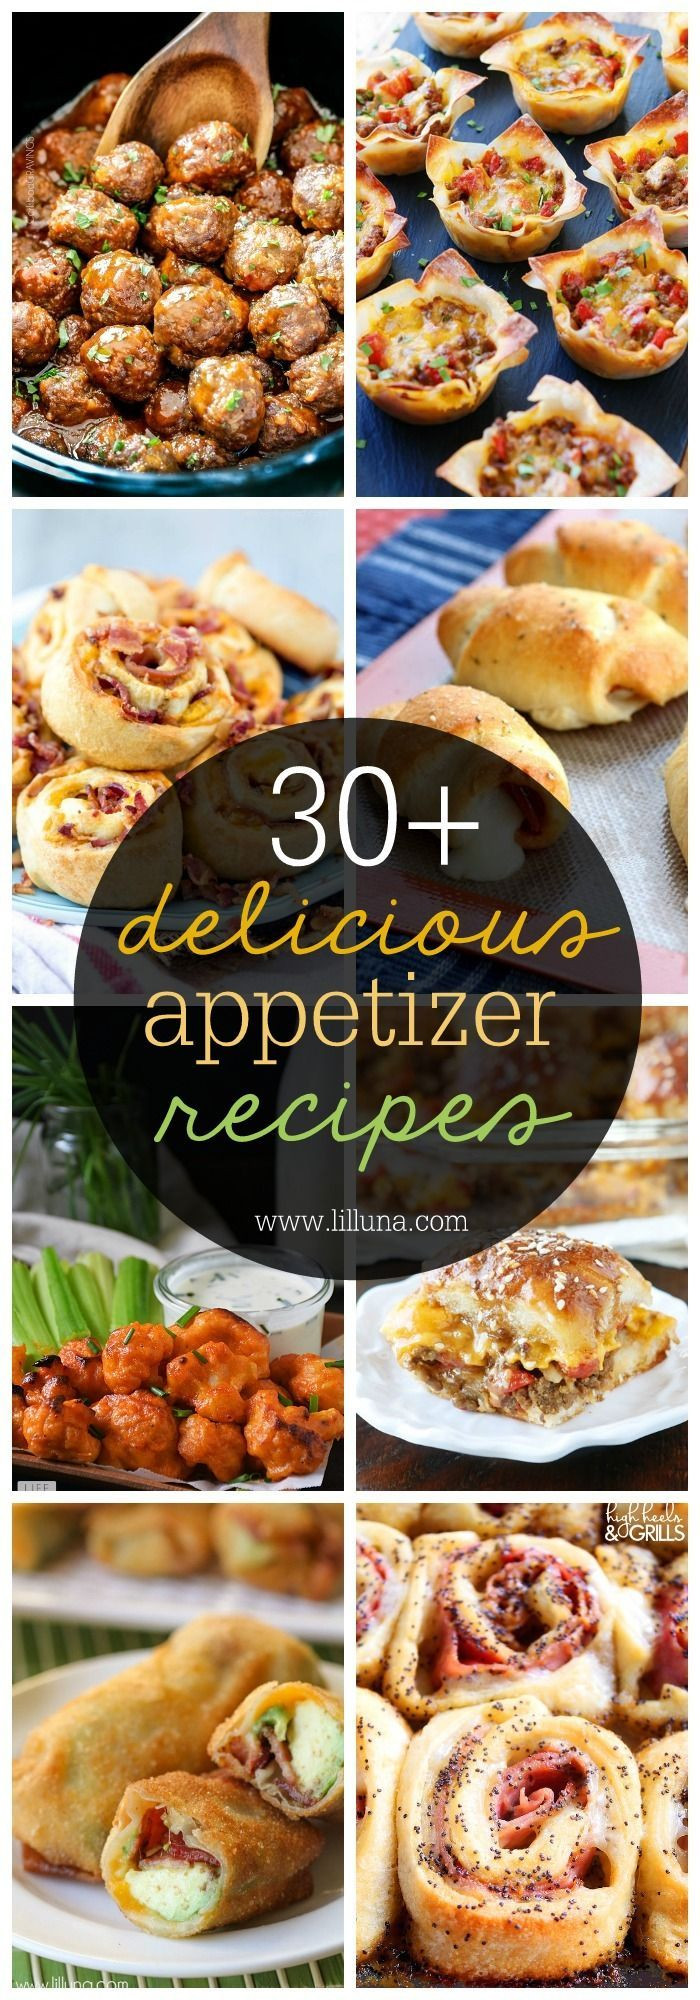 Good Christmas Appetizers
 30 Appetizer Recipes a great collection for parties